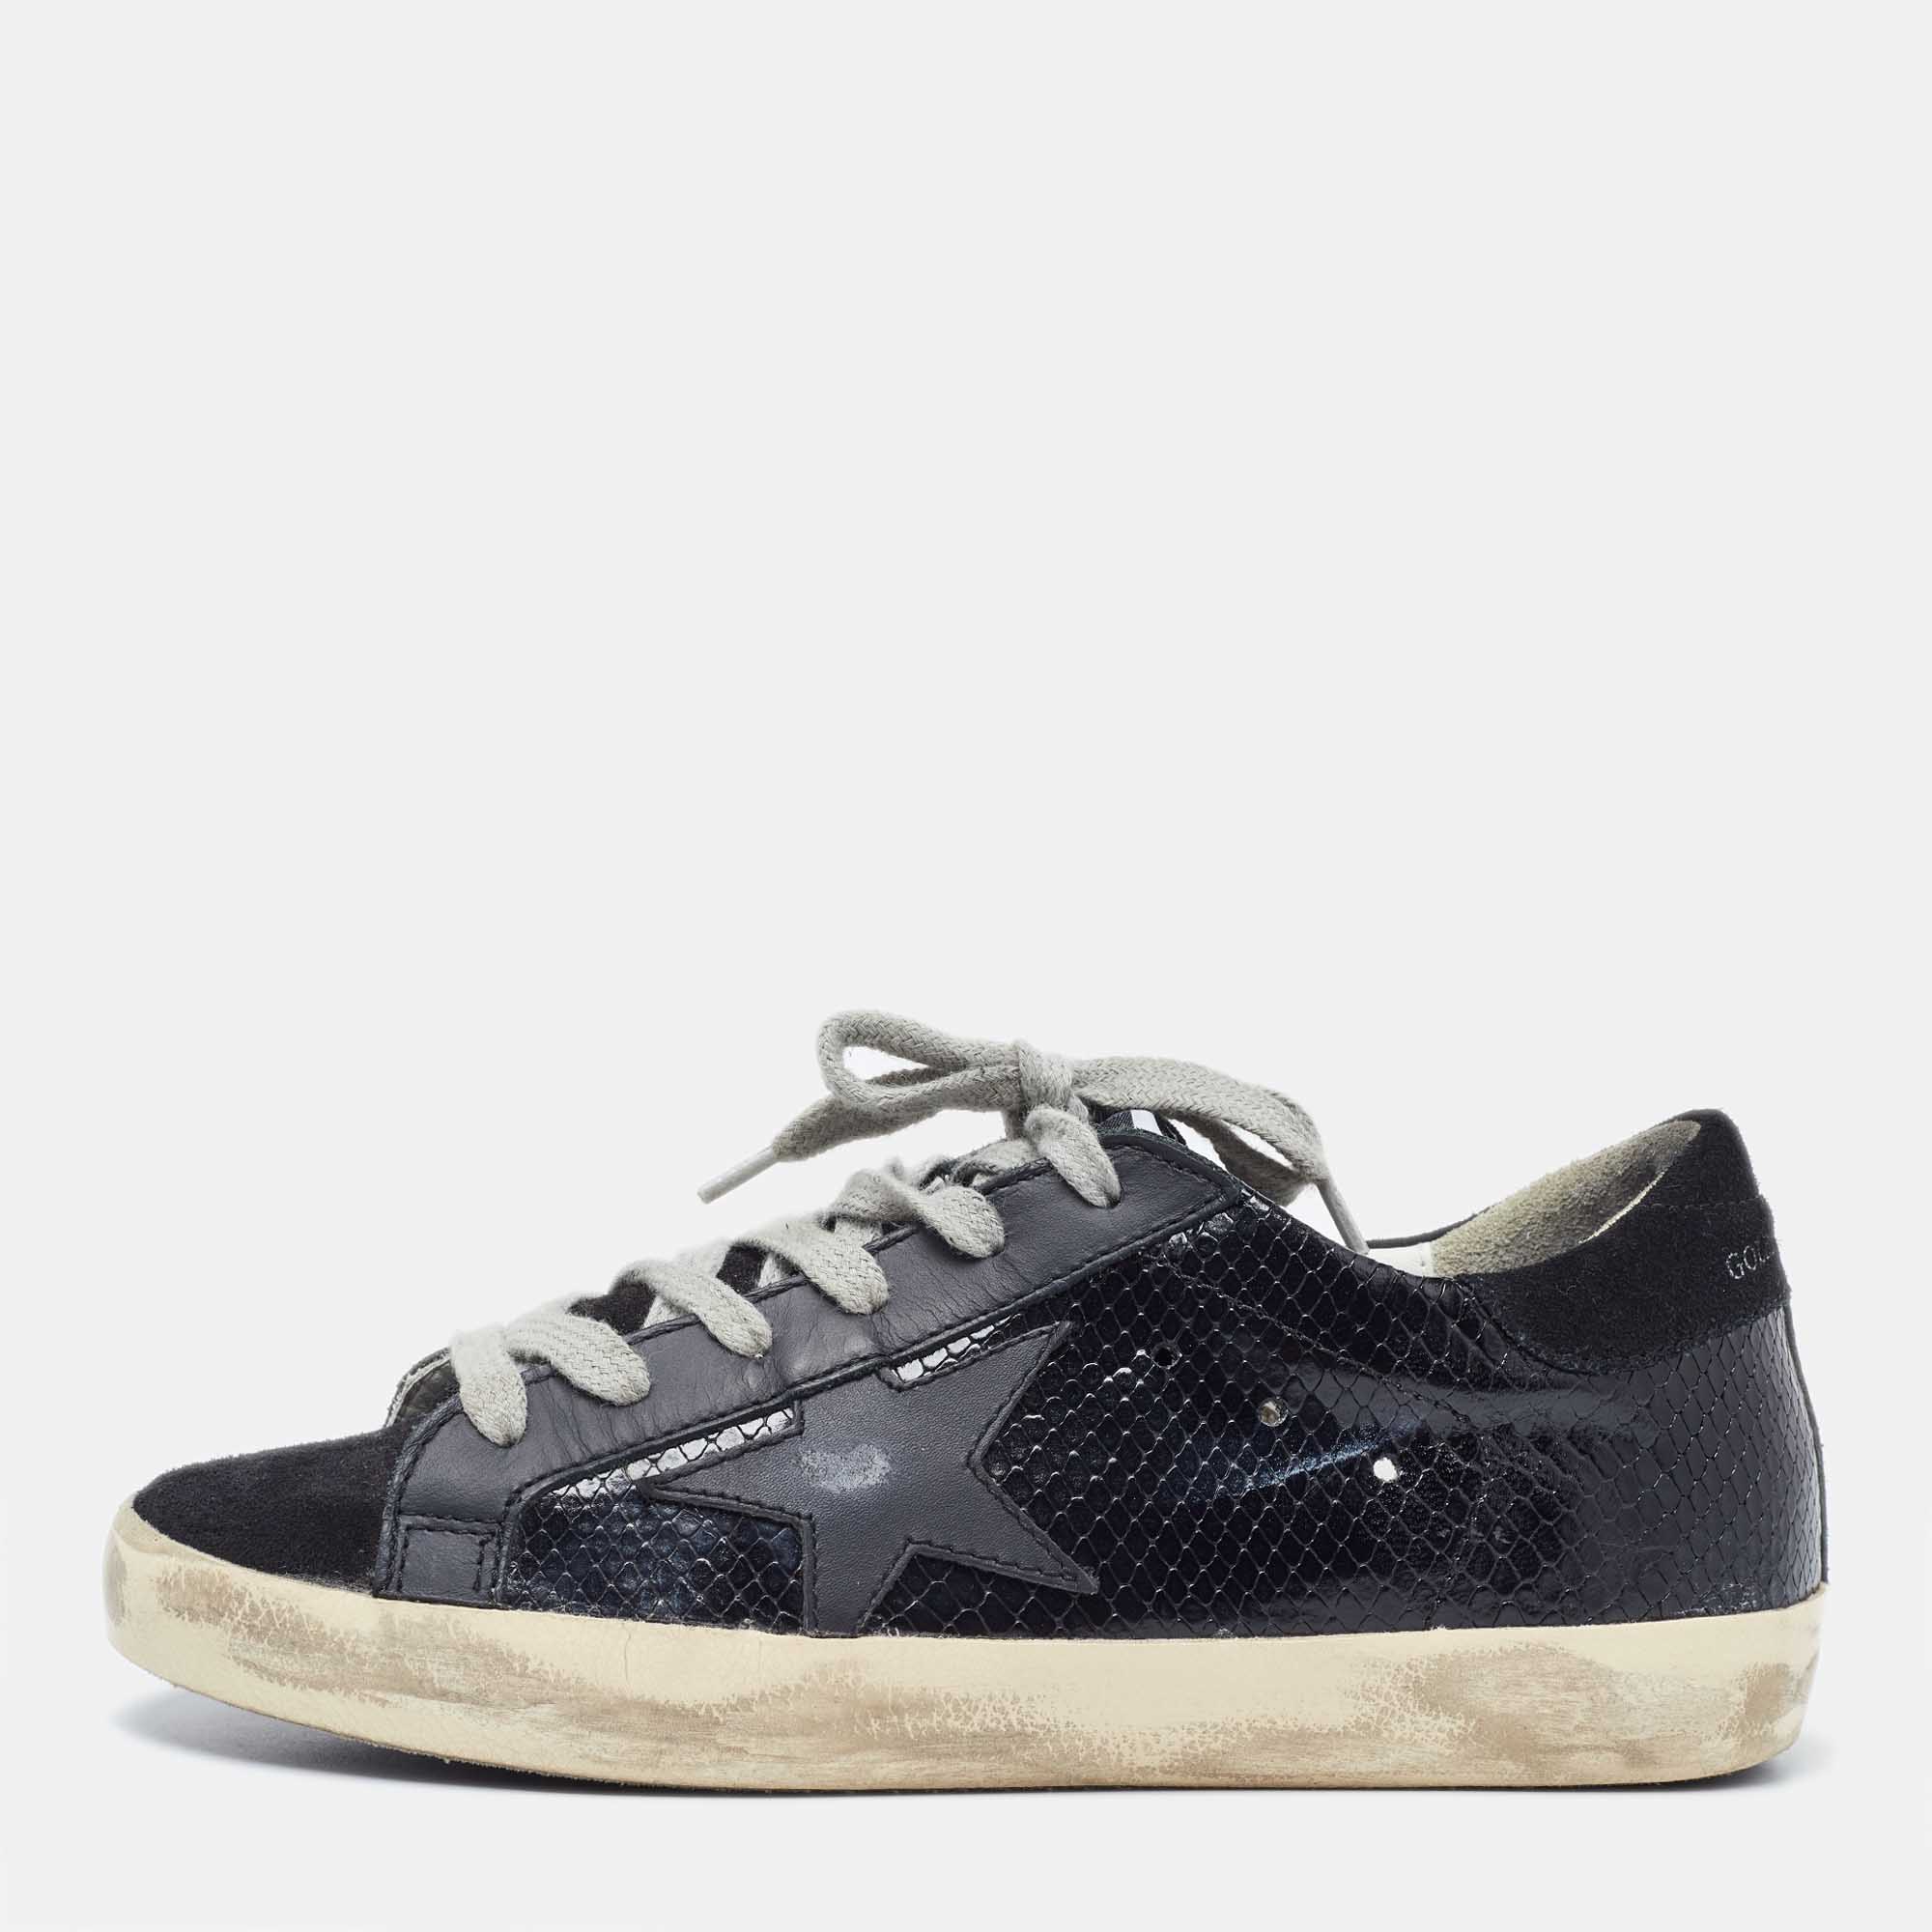 Golden goose black suede and python embossed leather hi star low top sneakers size 36